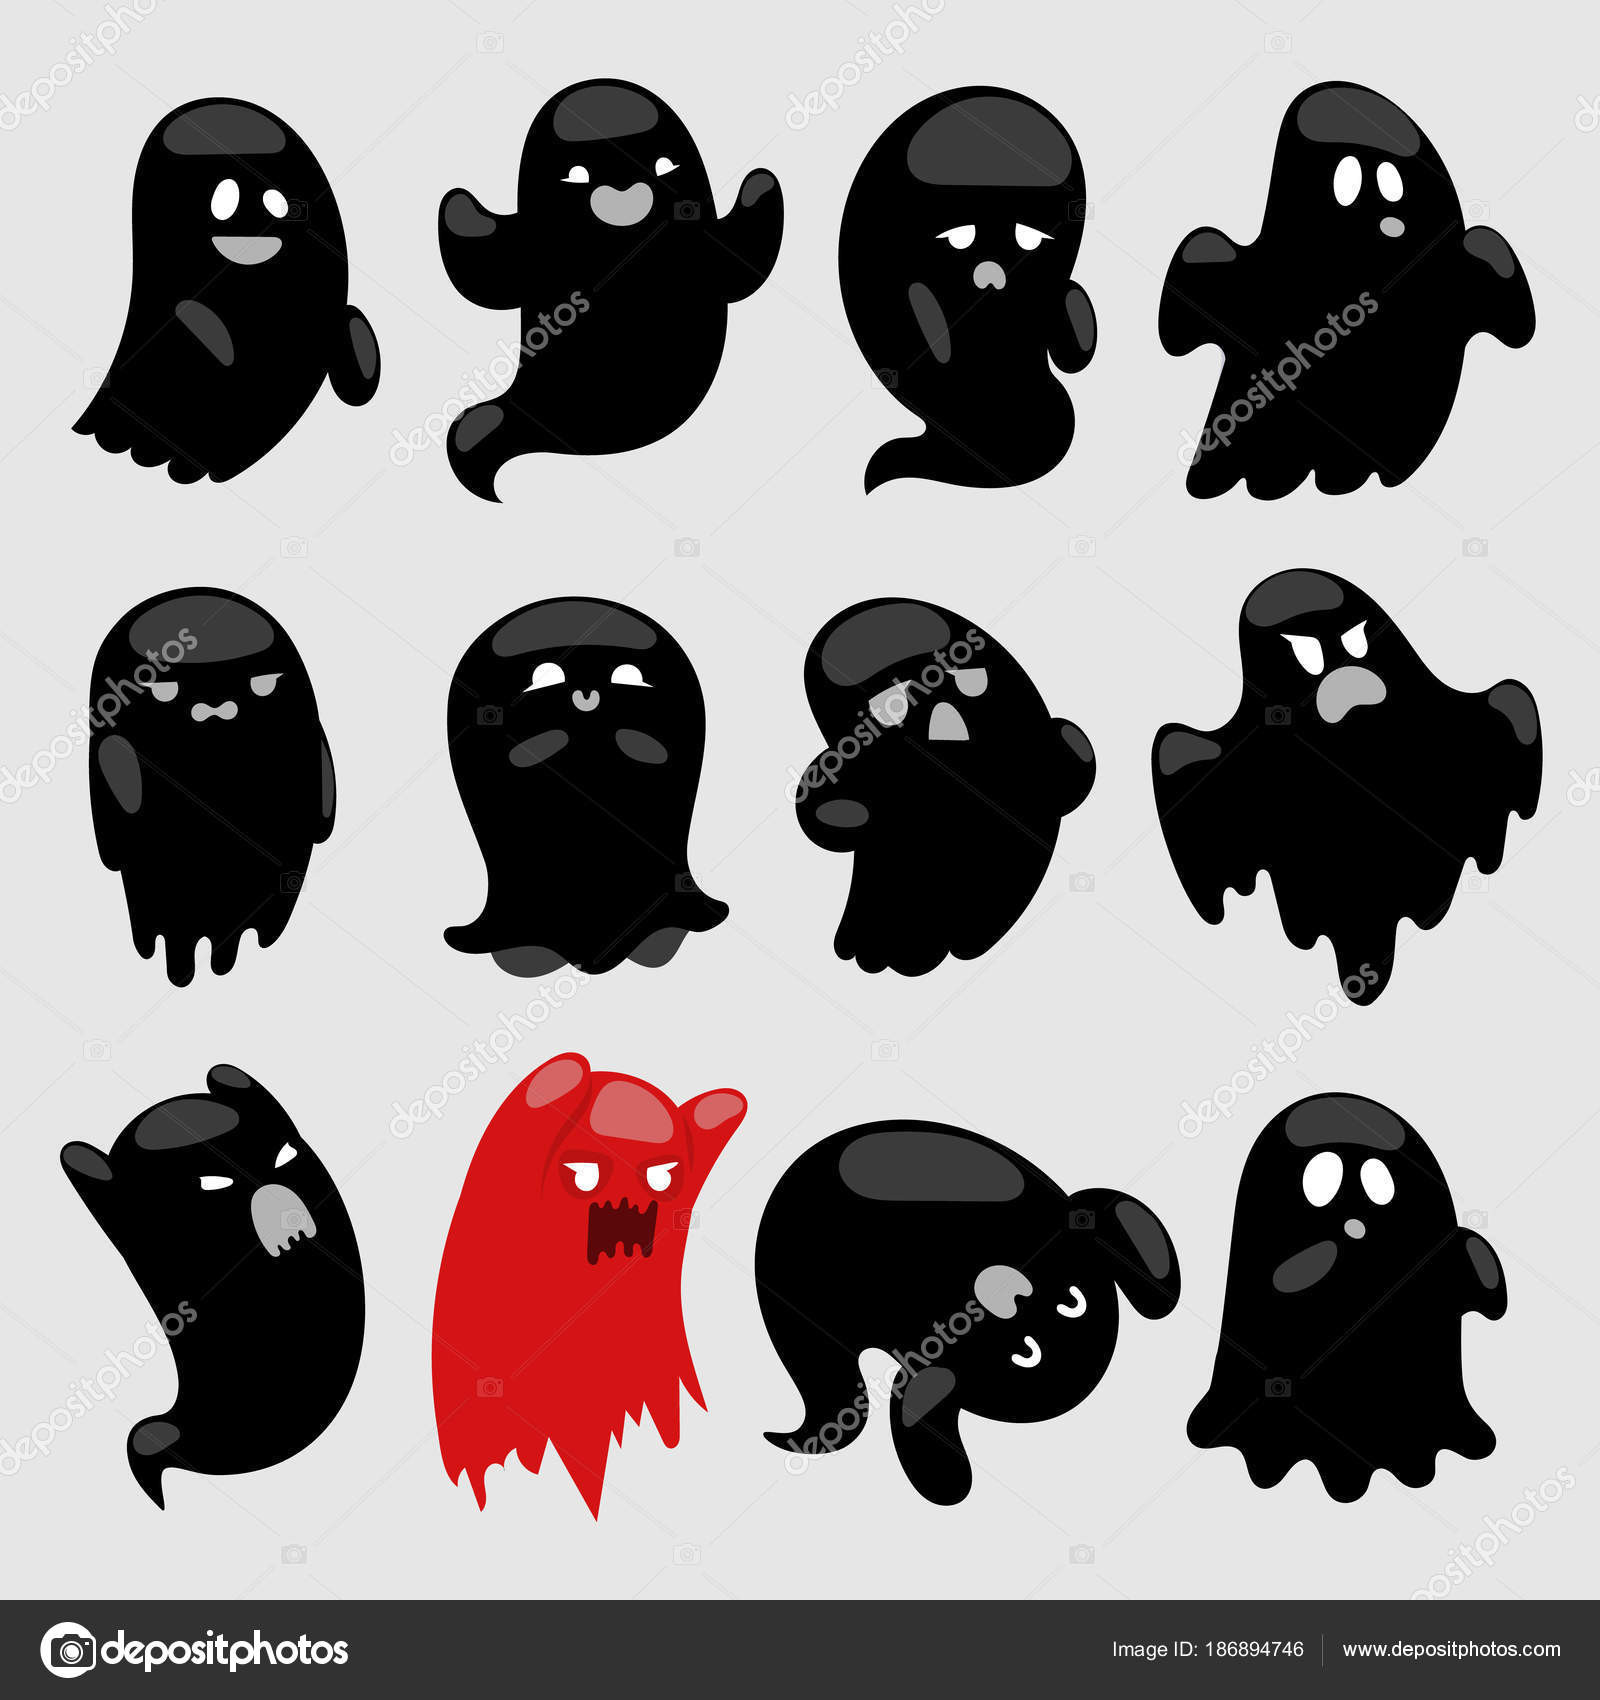 Cartoon spooky ghost vector character illsutartion black and red spooky ...